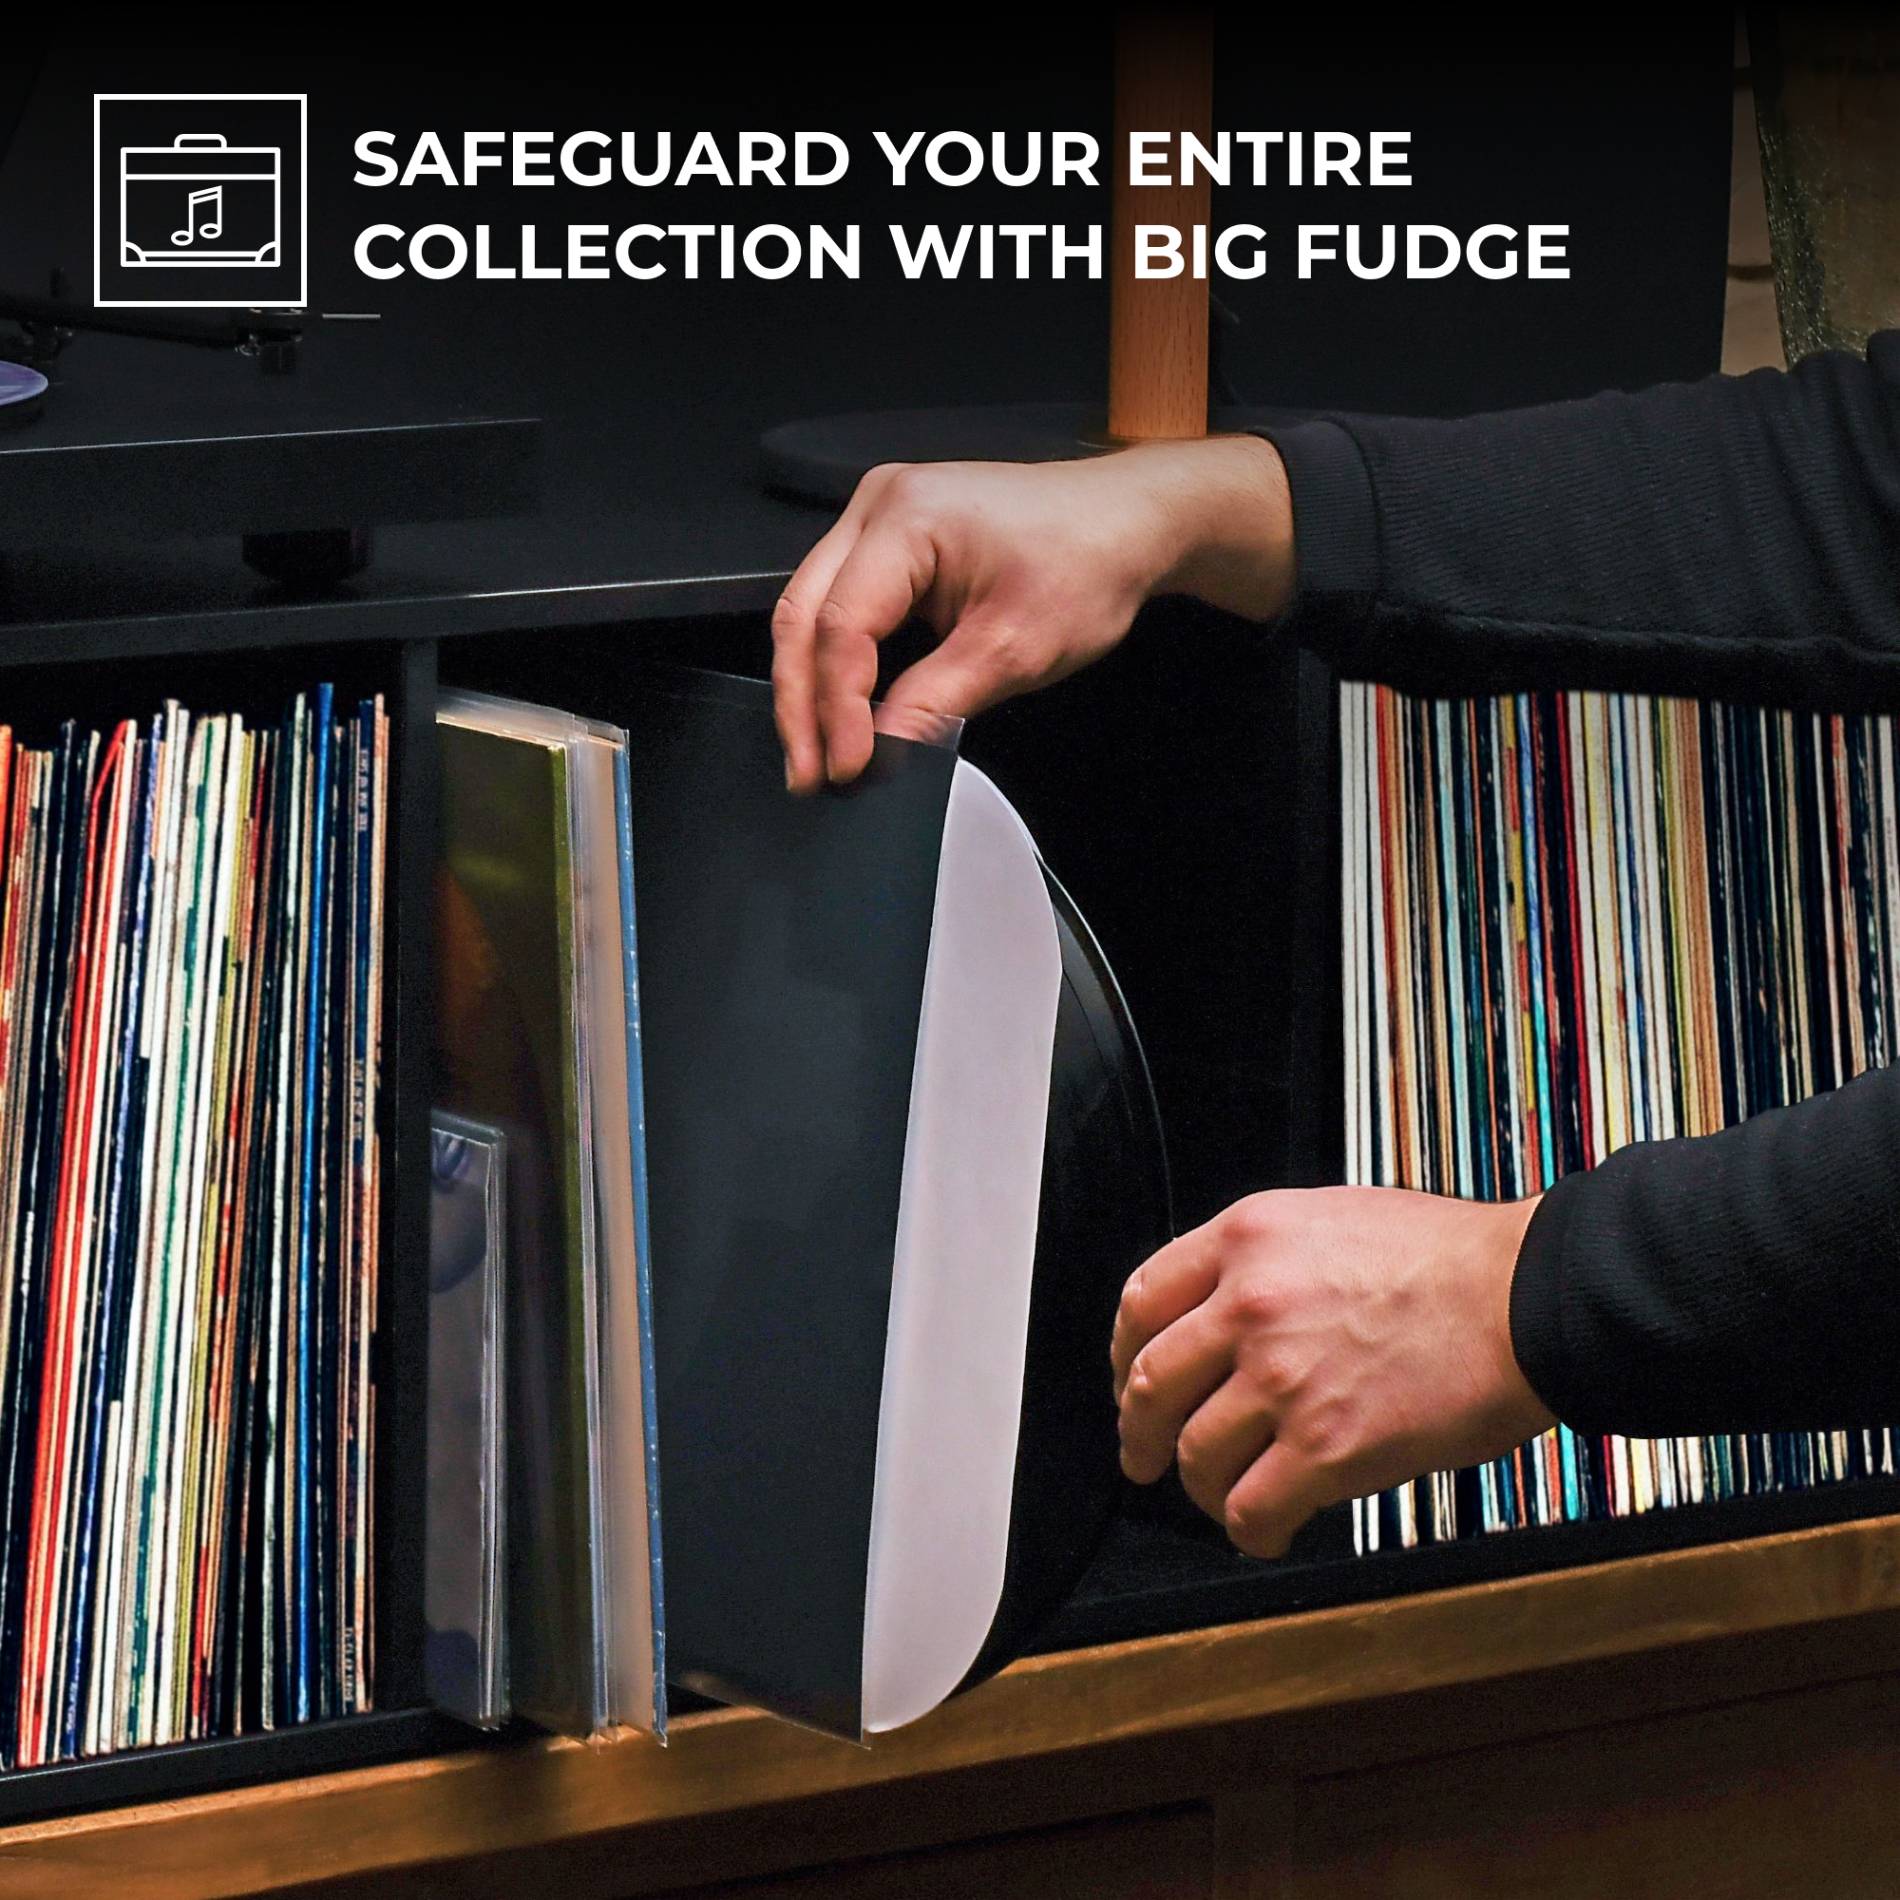 Safegaurd-your-entire-collection-with-big-fudge